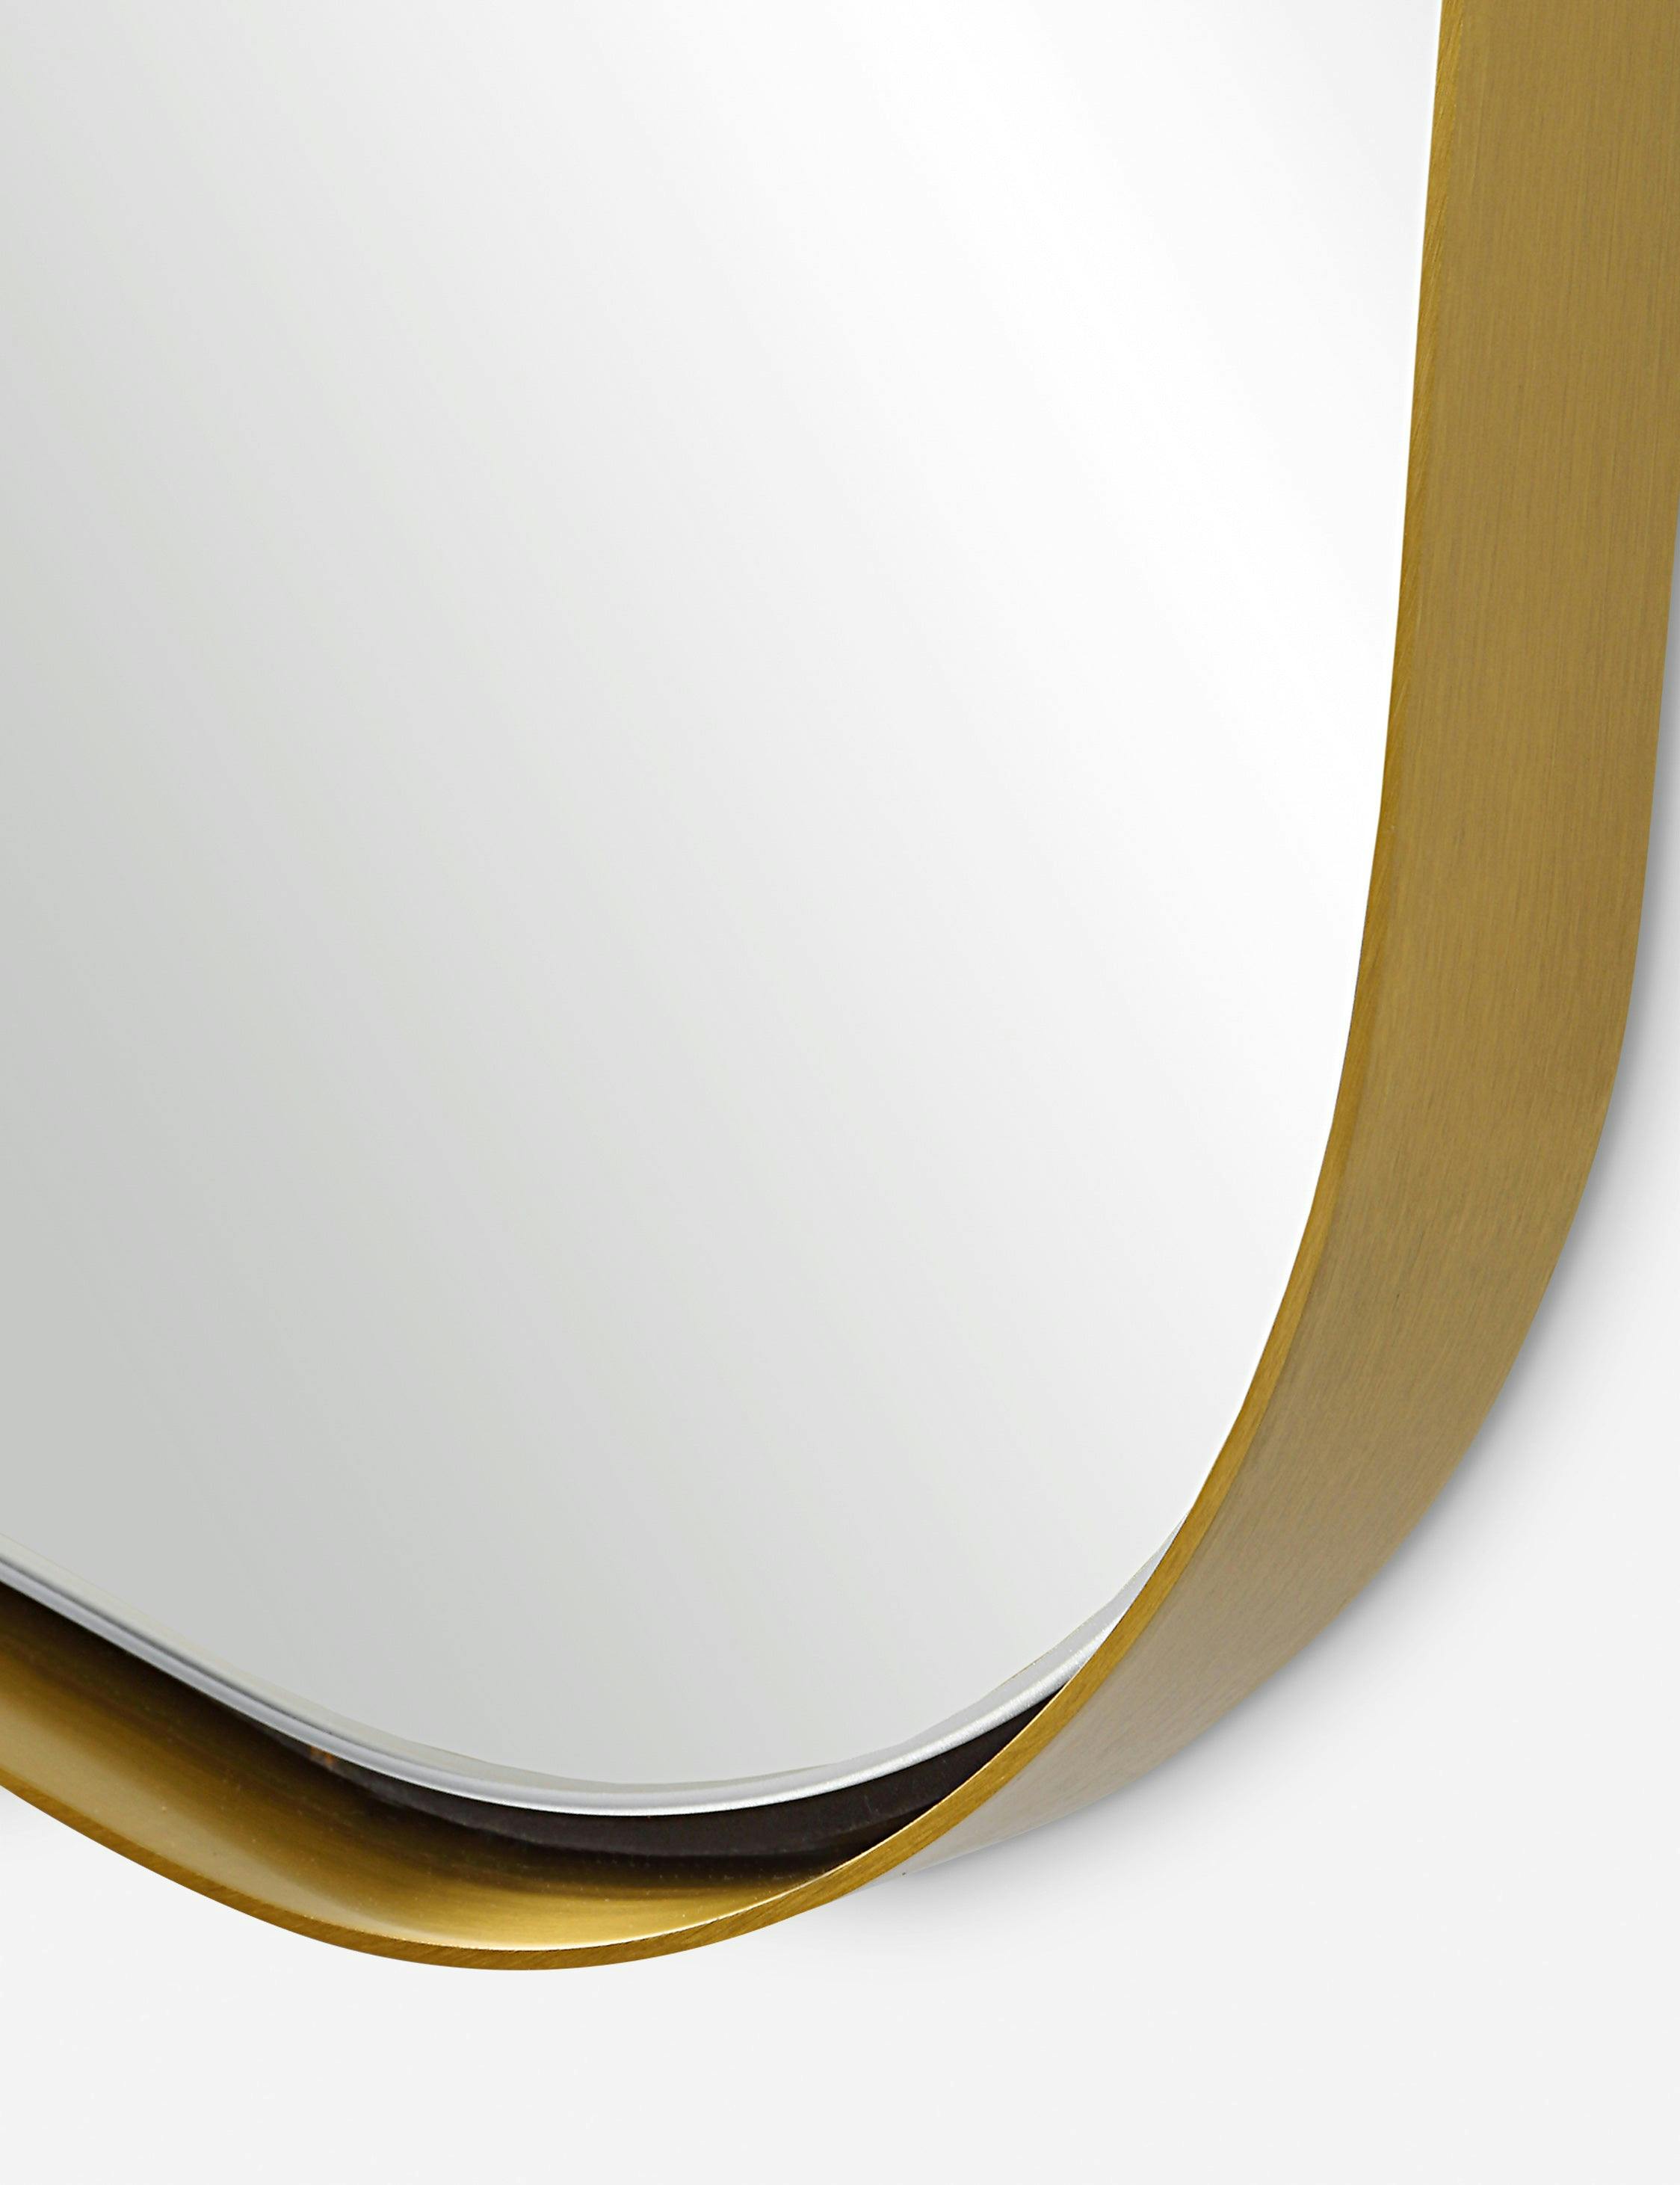 Belvoir Contemporary Full Length Wood Mirror in Gold